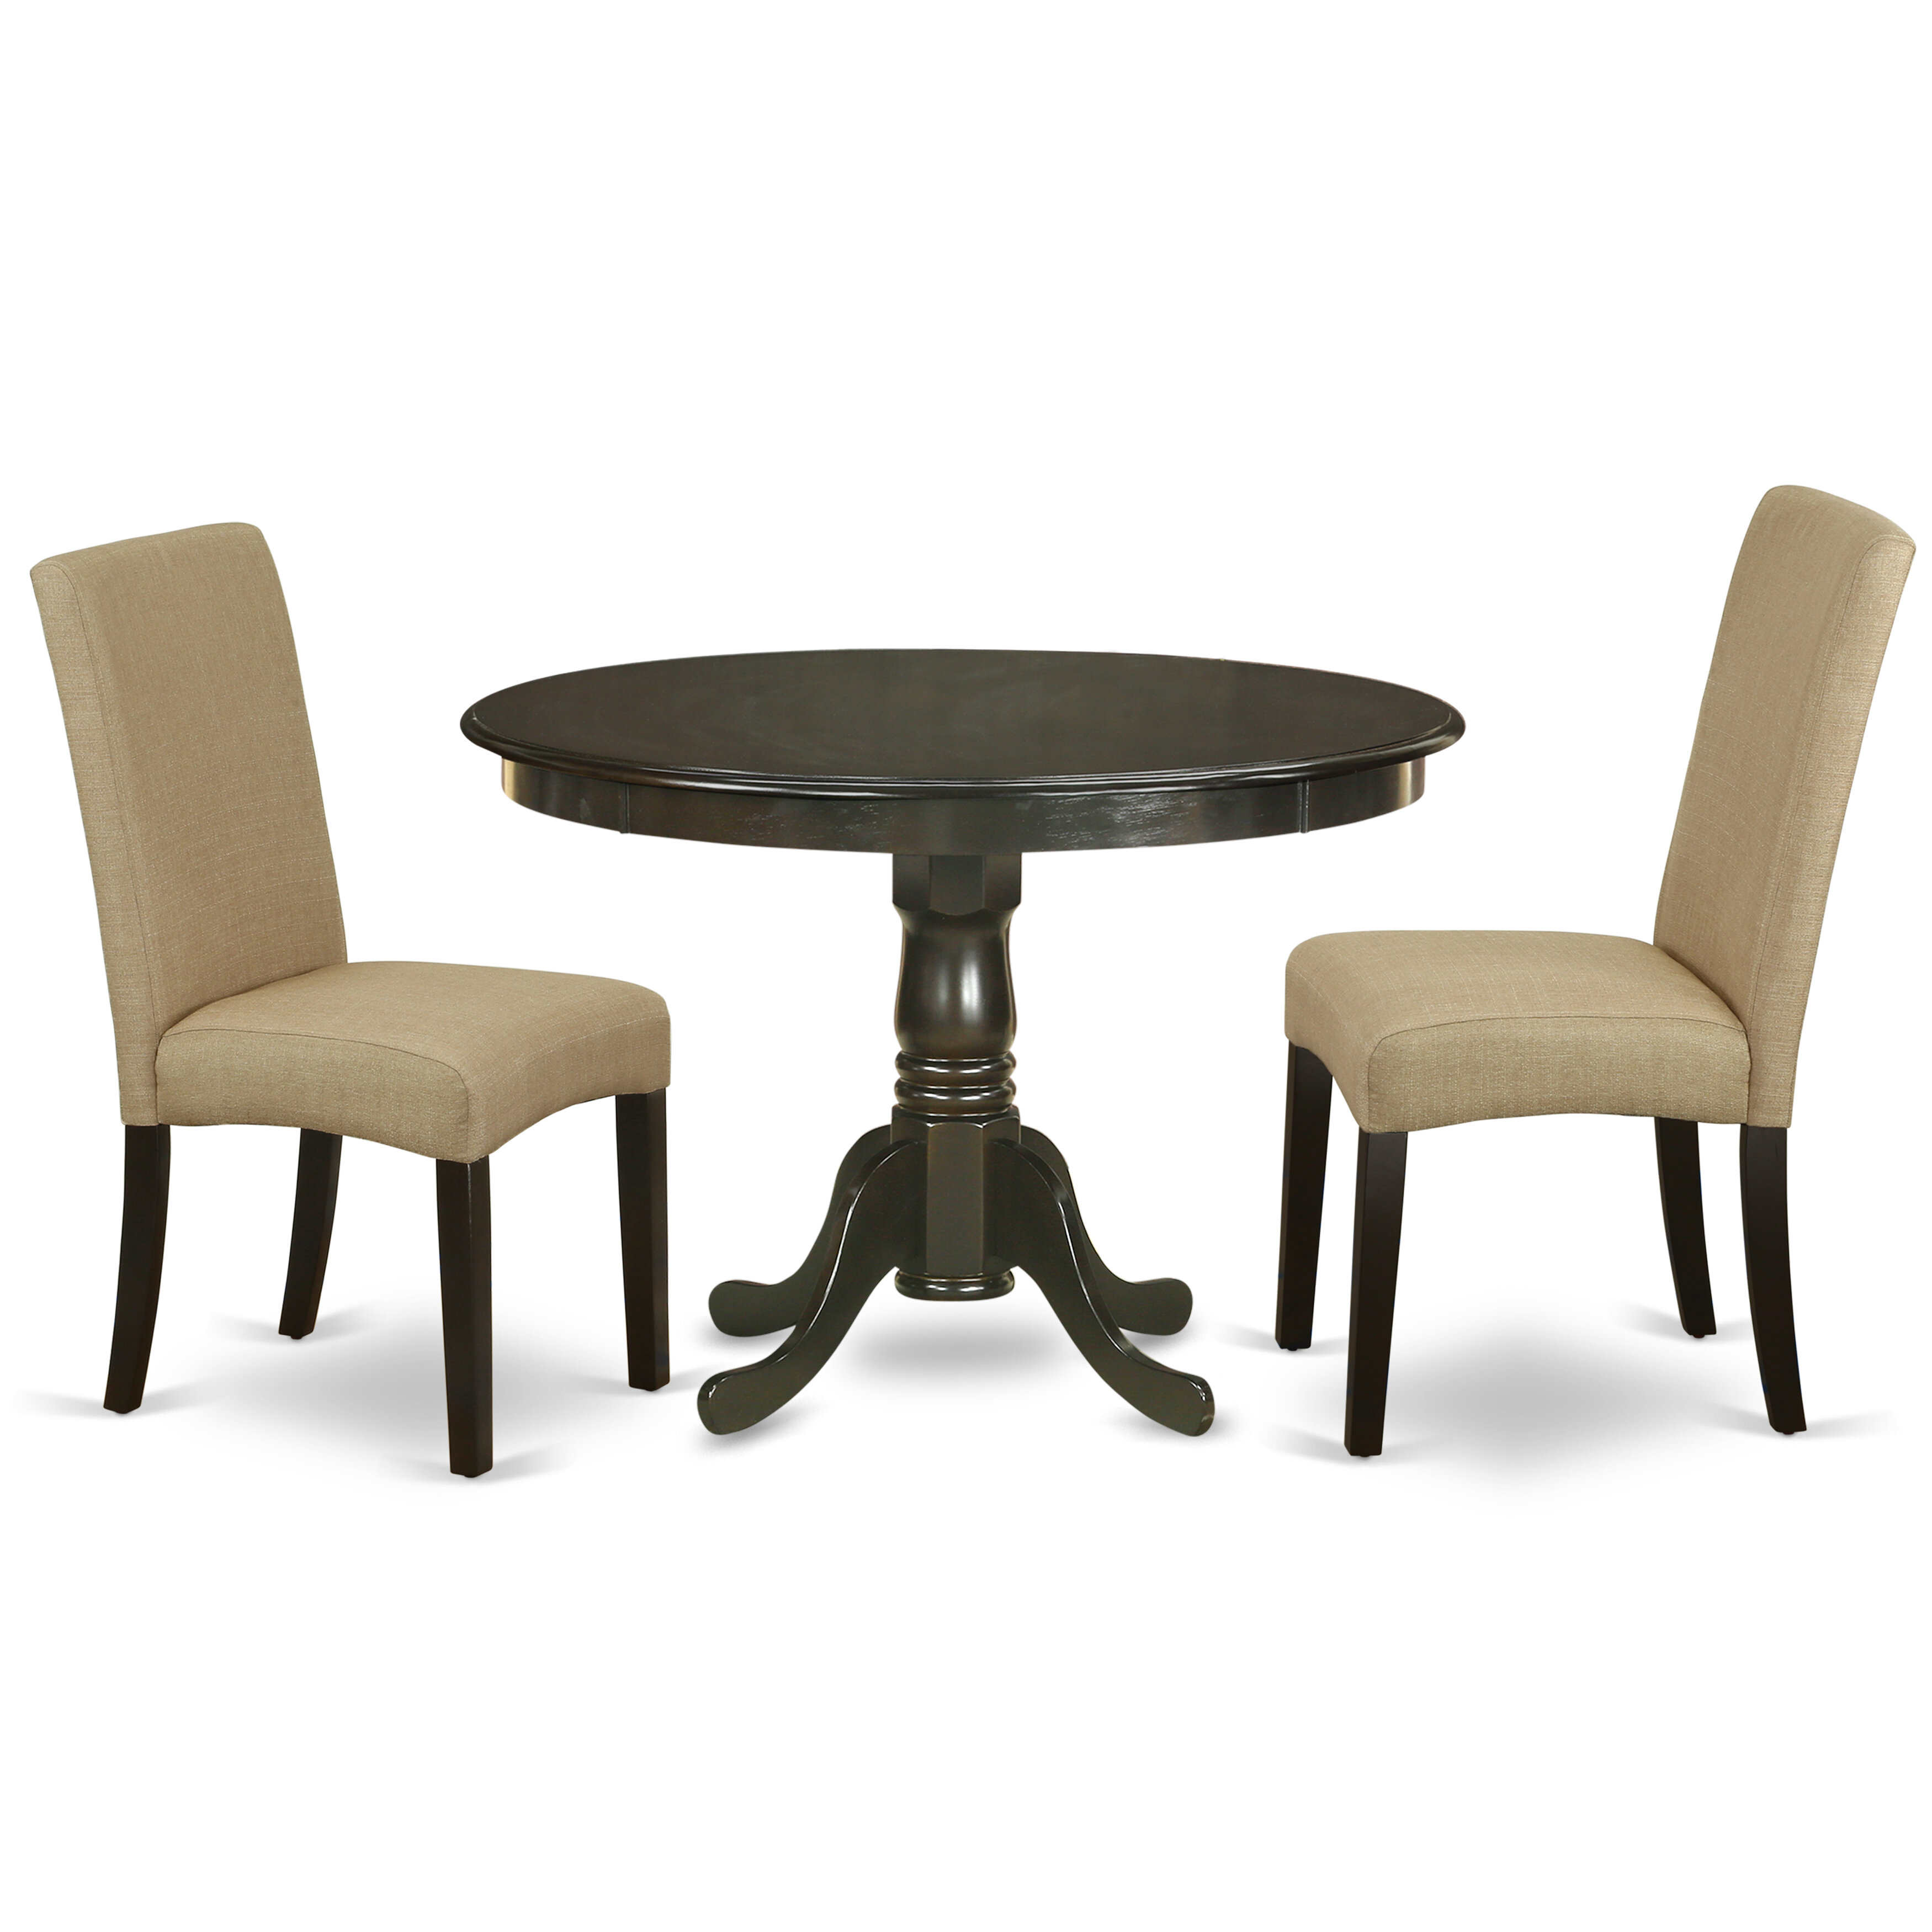 Winston Porter 7118c14087a94922aa510c53f95375bd 3pc Dinette Set Includes A Round 42 Inch Dining Table And 2 Parson Chair With Cappuccino Finish Leg And Linen Fabric Brown Colour Wayfair Ca